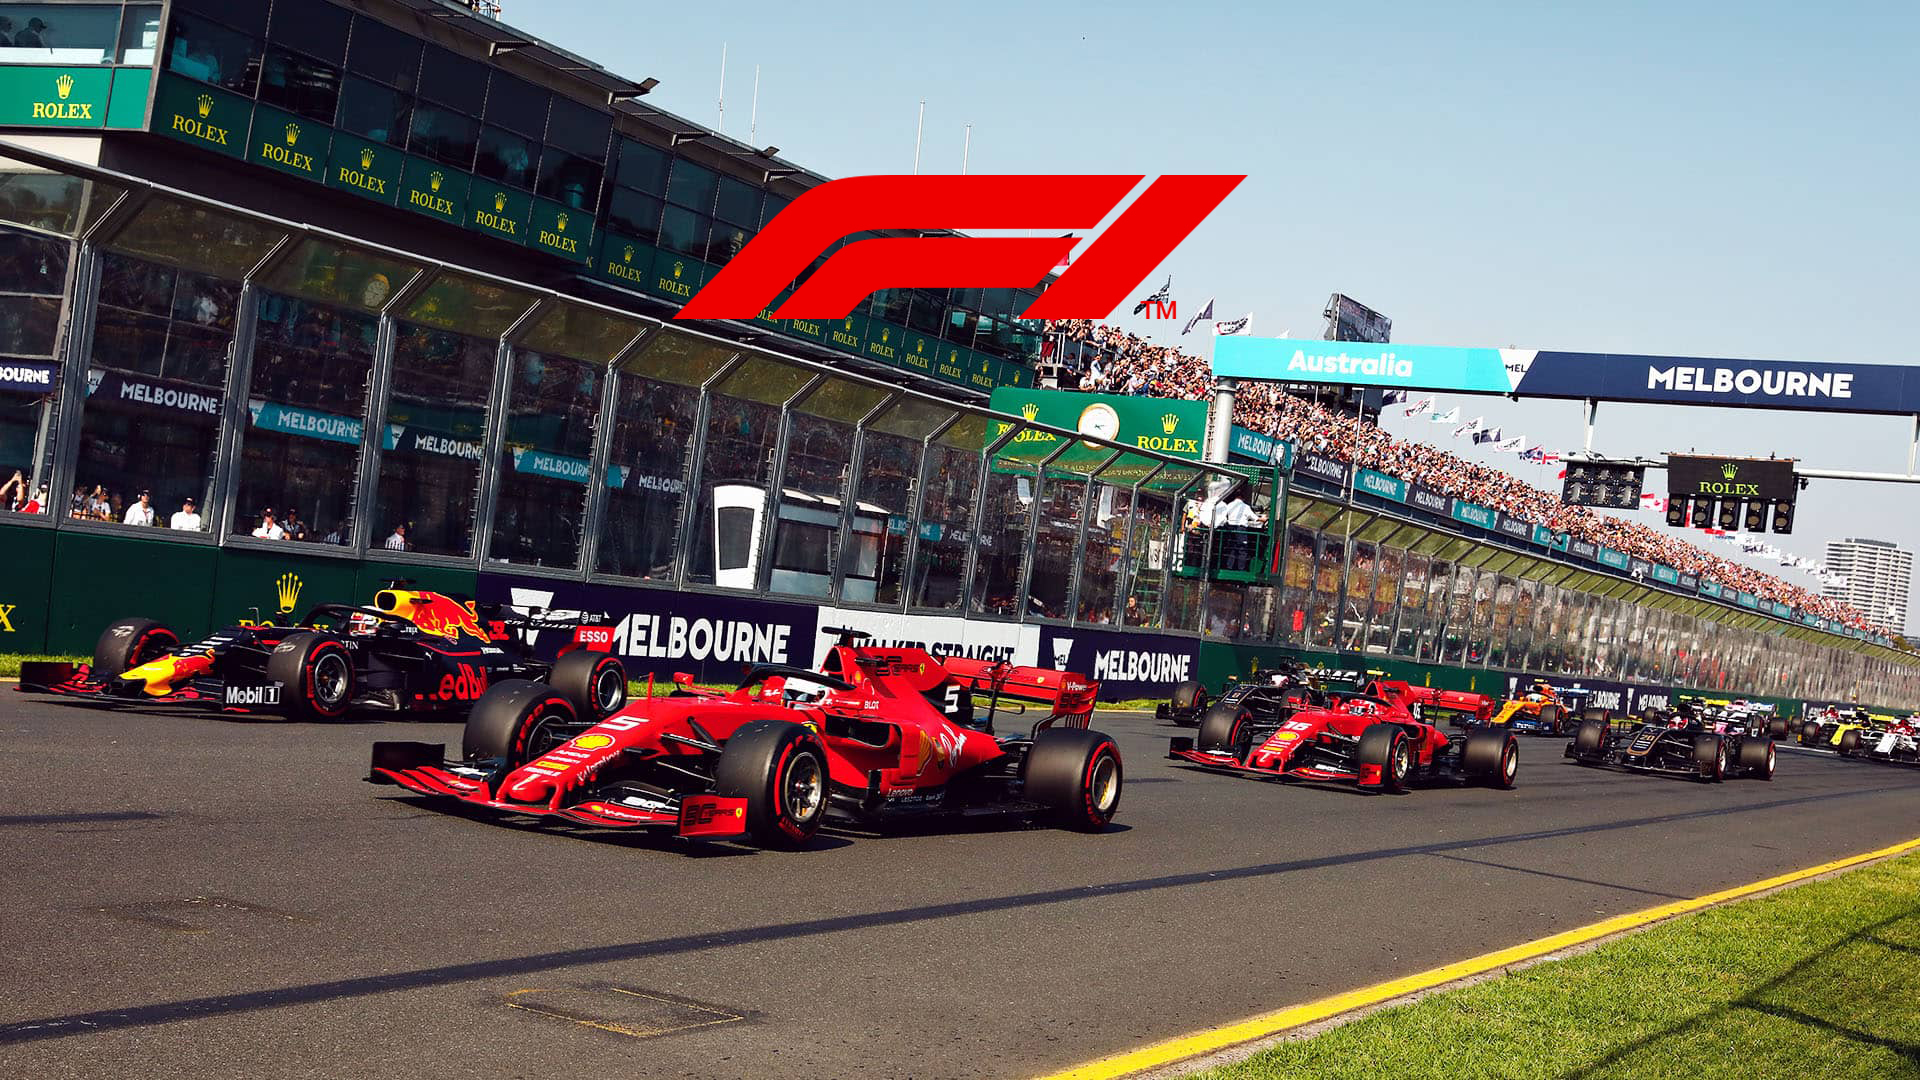 Australian Grand Prix live stream how to watch the whole race online for free Android Central